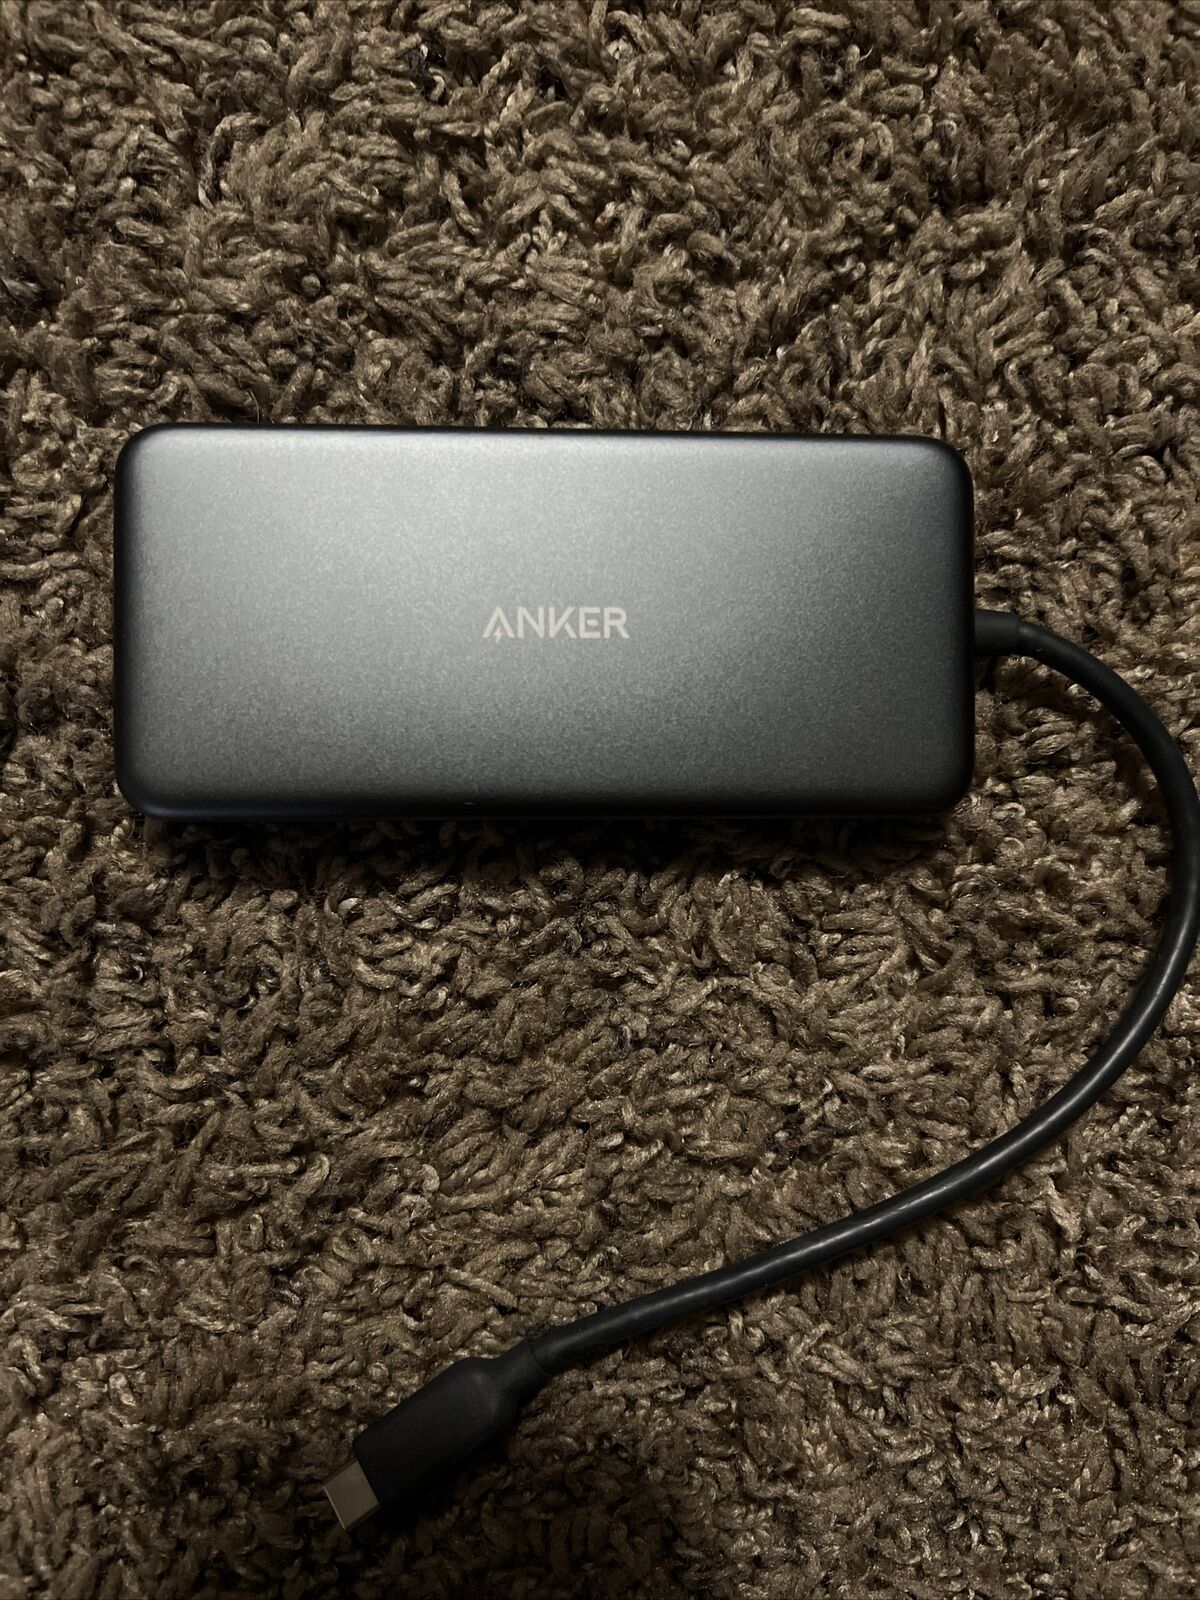 Anker PowerExpand+ 7-in-1 USB-C PD Ethernet Hub A8352 Dock MacBook Air / Pro XPS